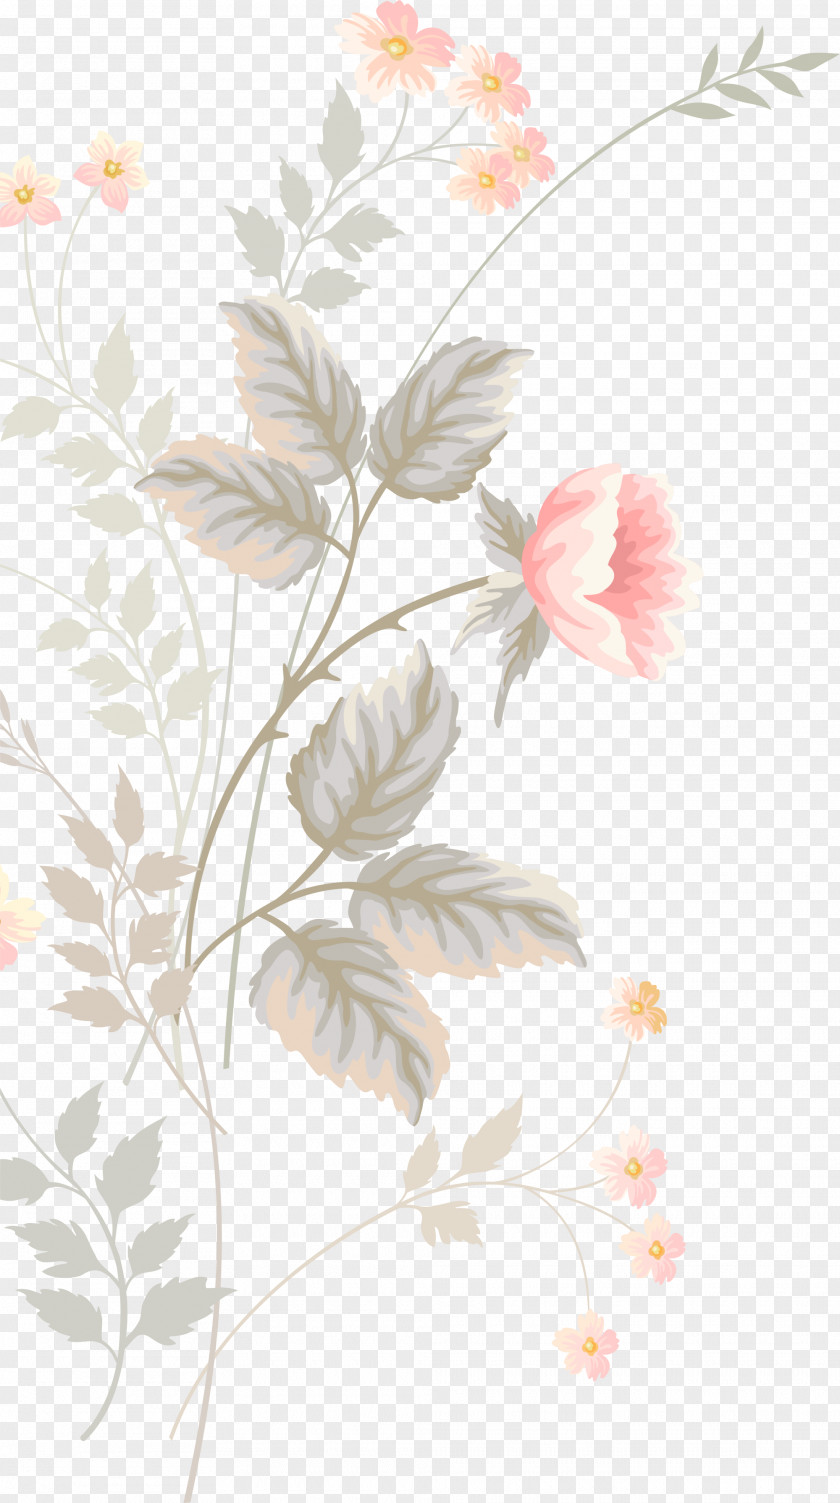 Pink Hand-painted Flowers Floral Design Flower Watercolor Painting Pattern PNG